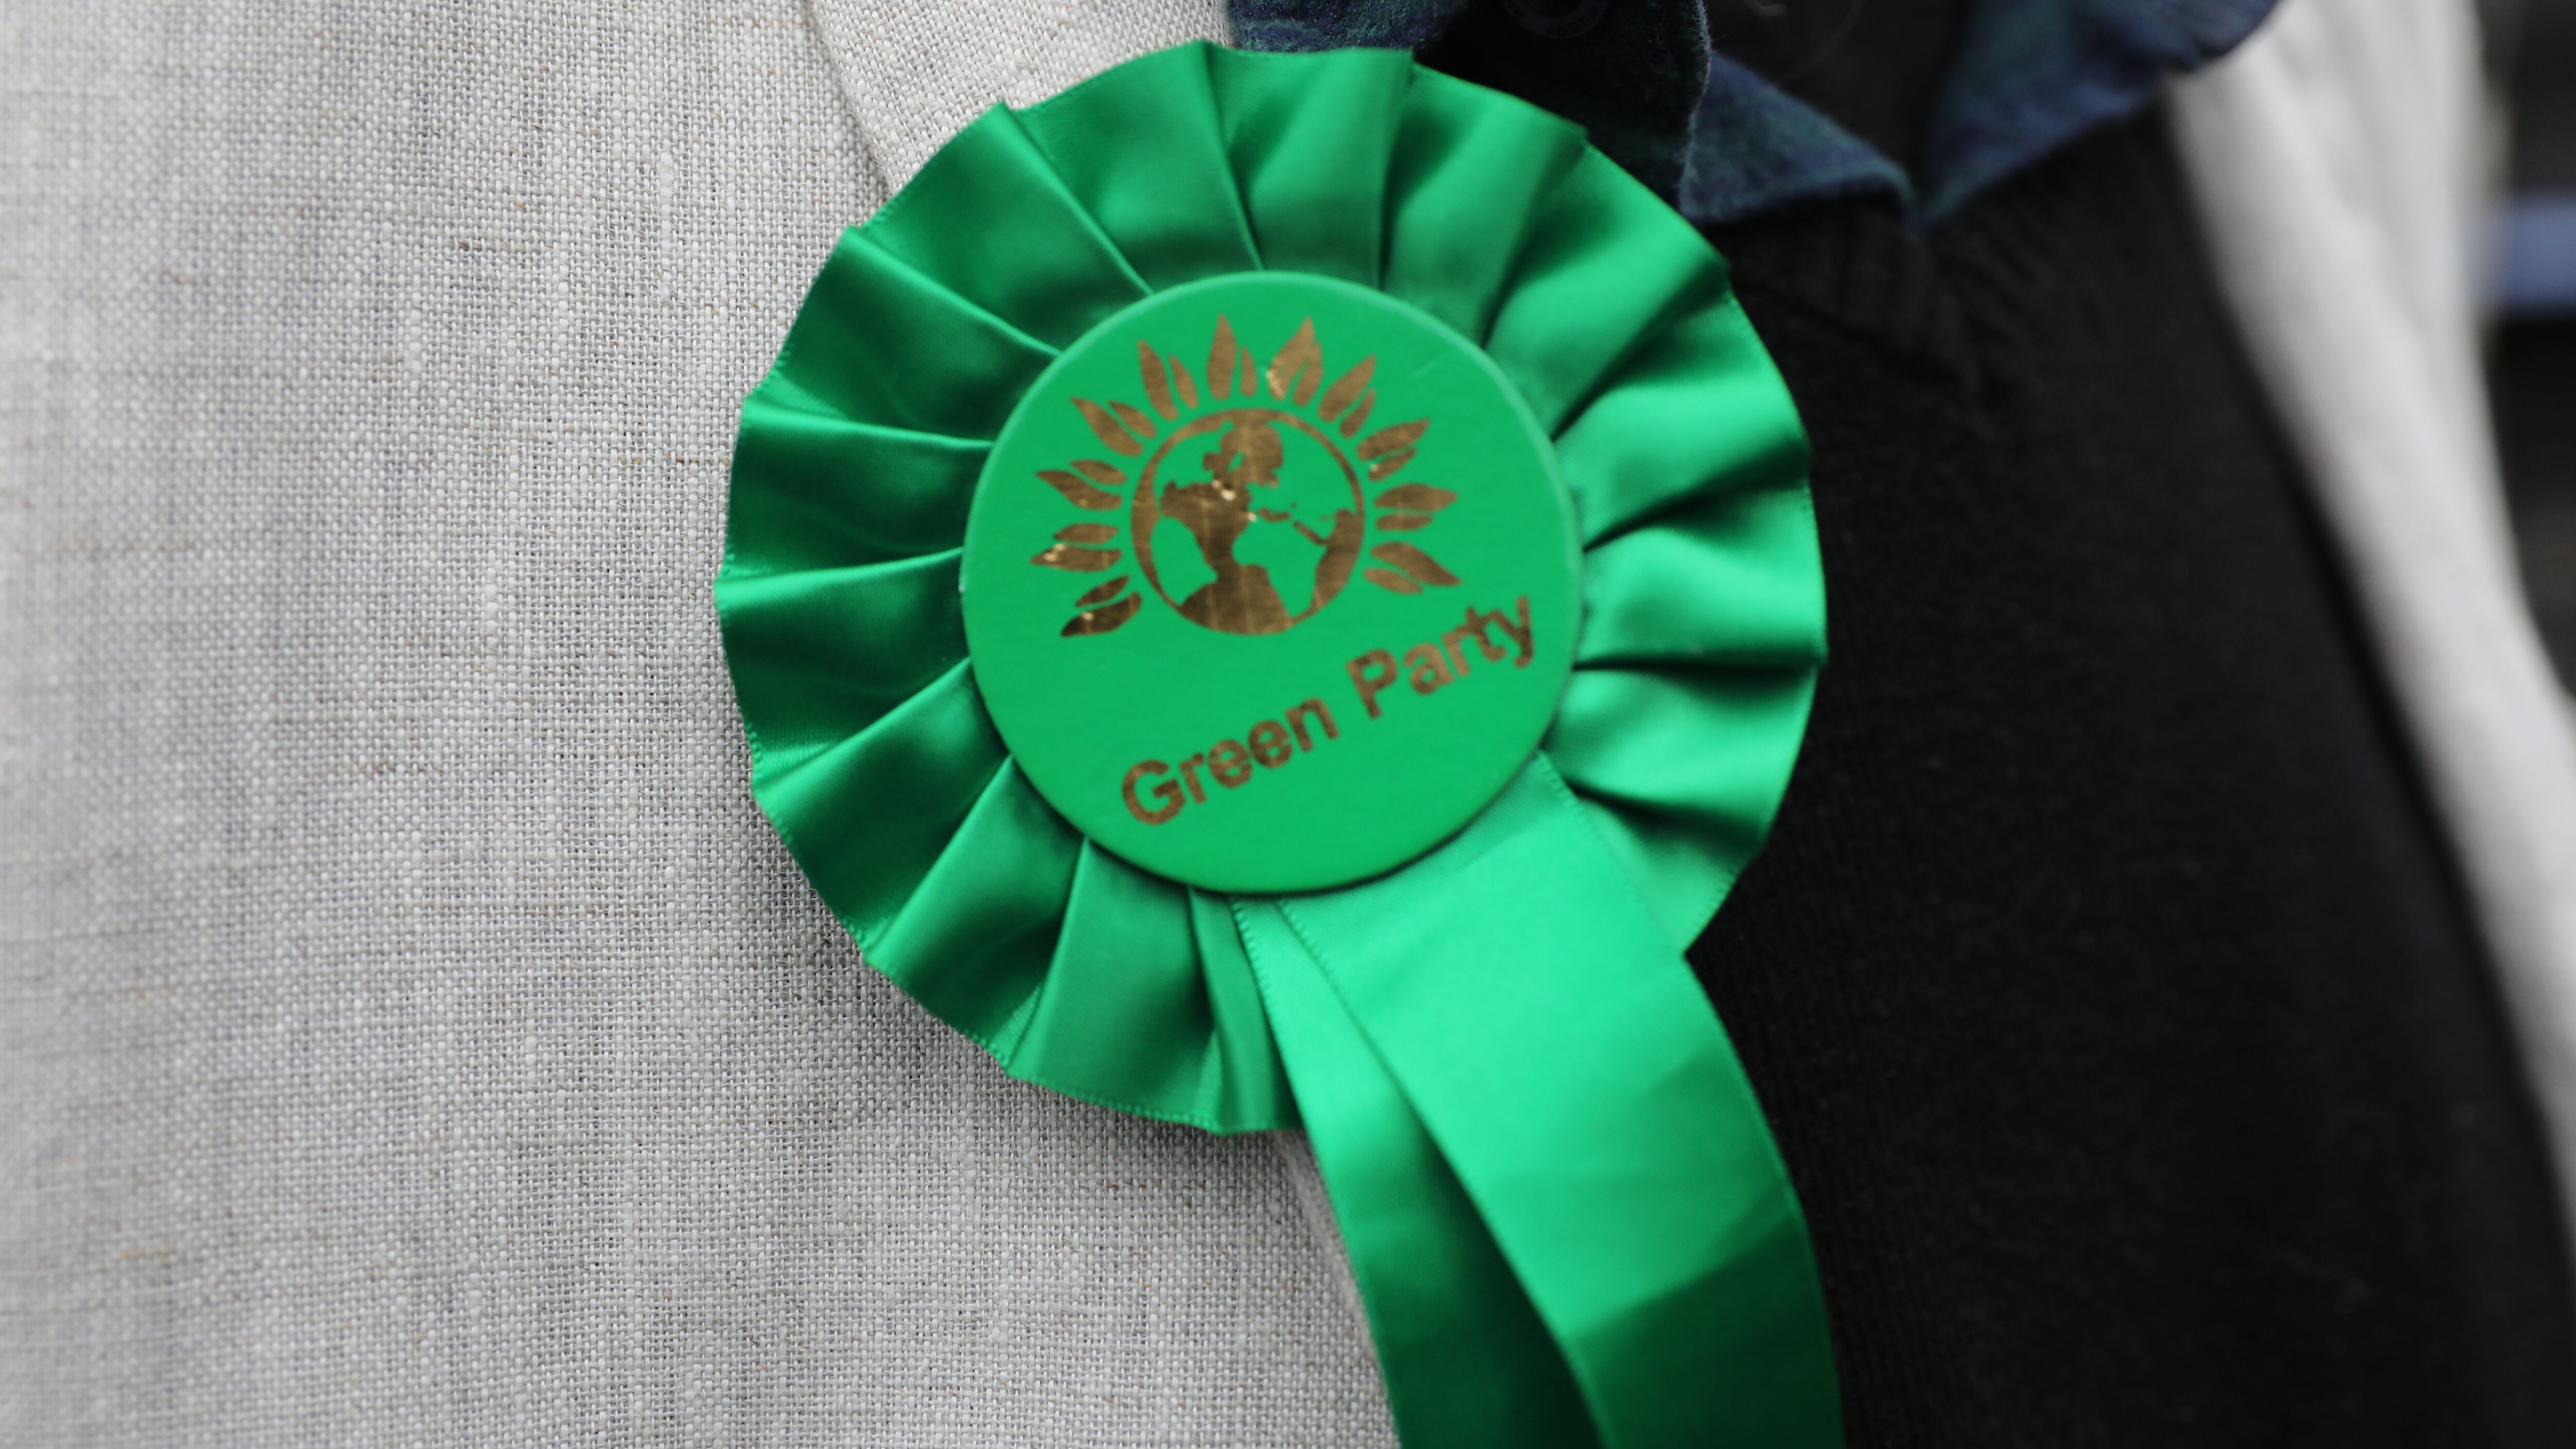 The Green Party manifesto includes pledges to raise taxes for the most wealthy